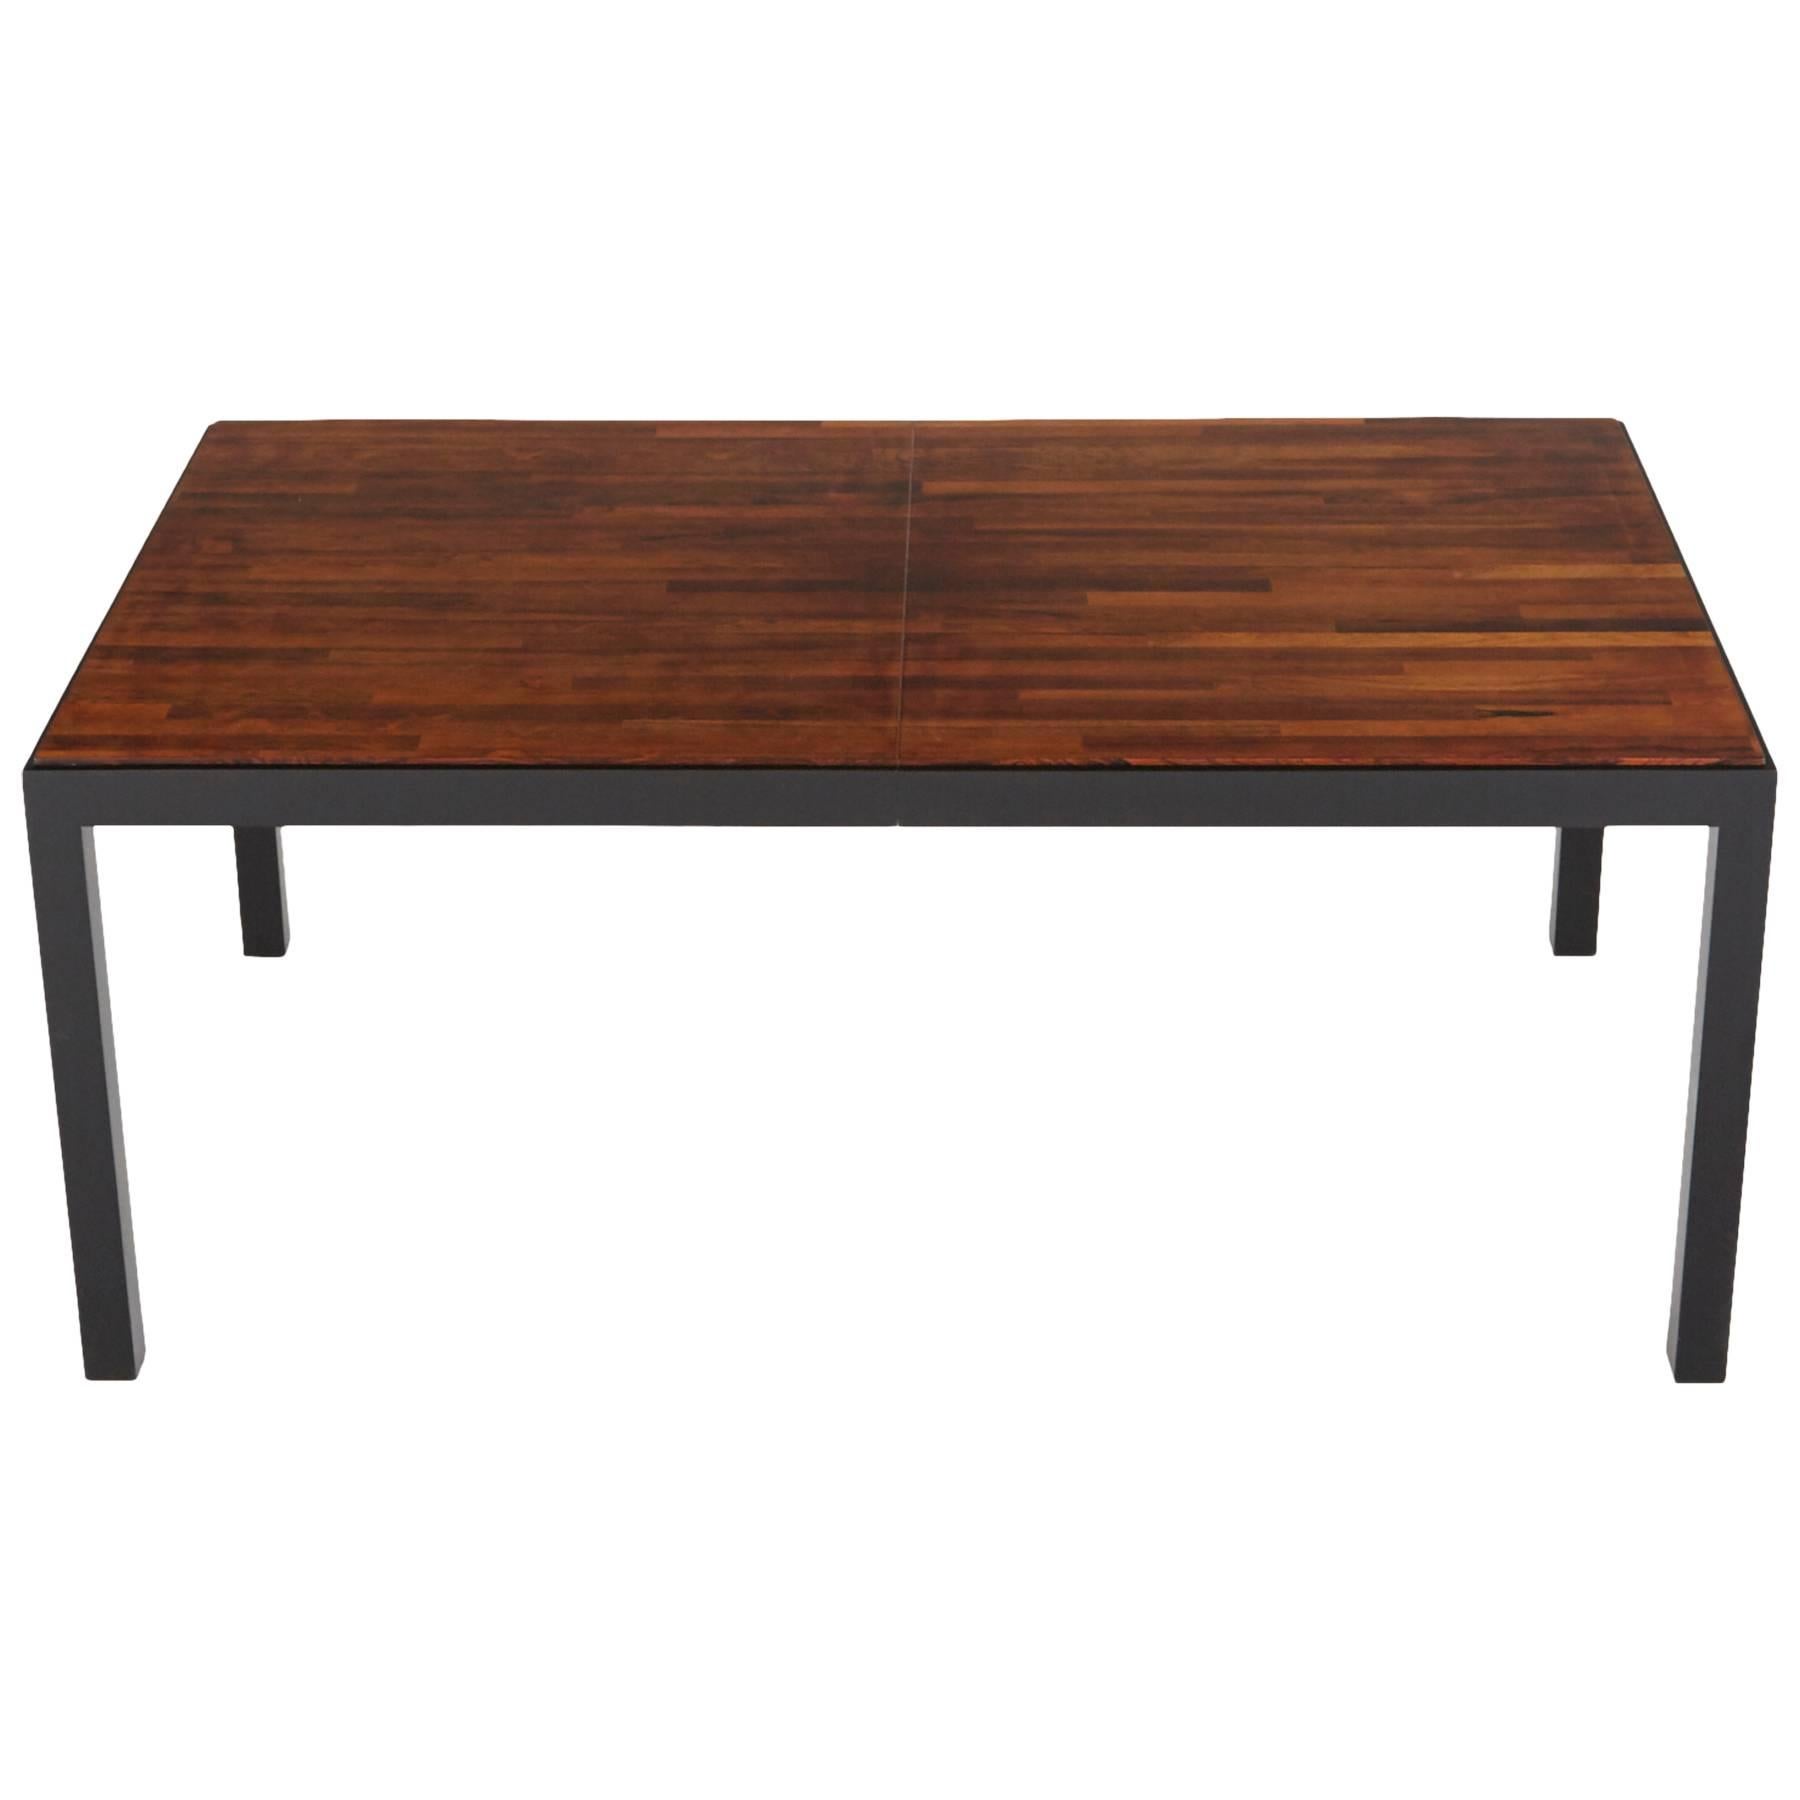 Milo Baughman for Directional, Exotic Mixed Woods Dining Table, Restored